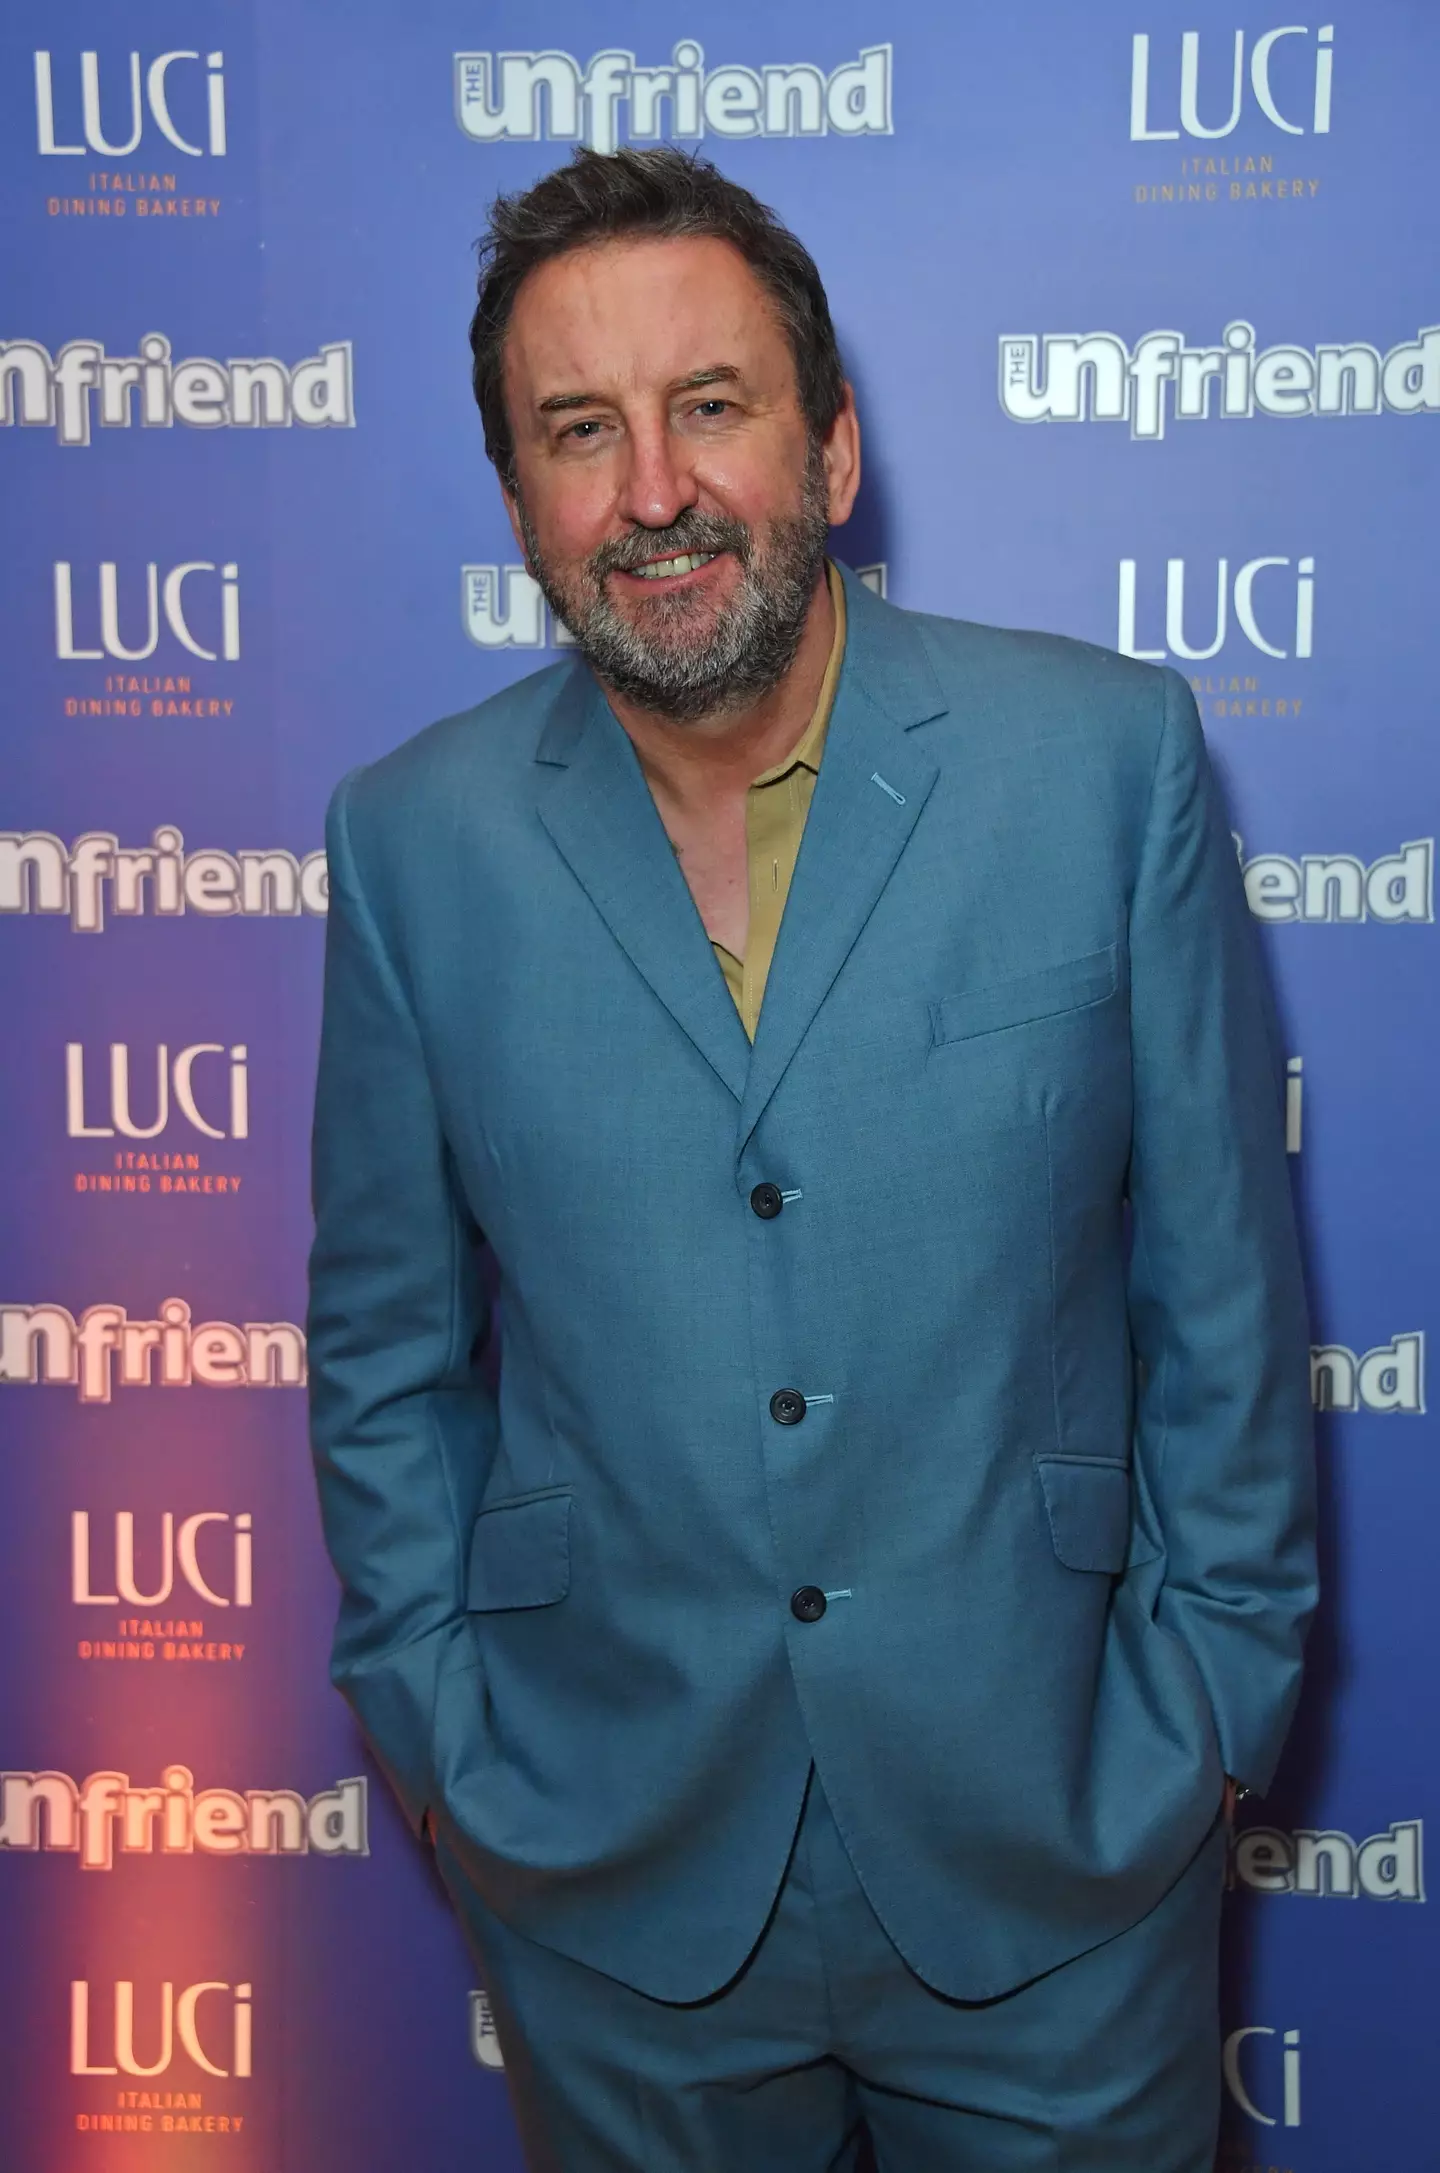 Lee Mack claimed that the show wasn't exciting enough.